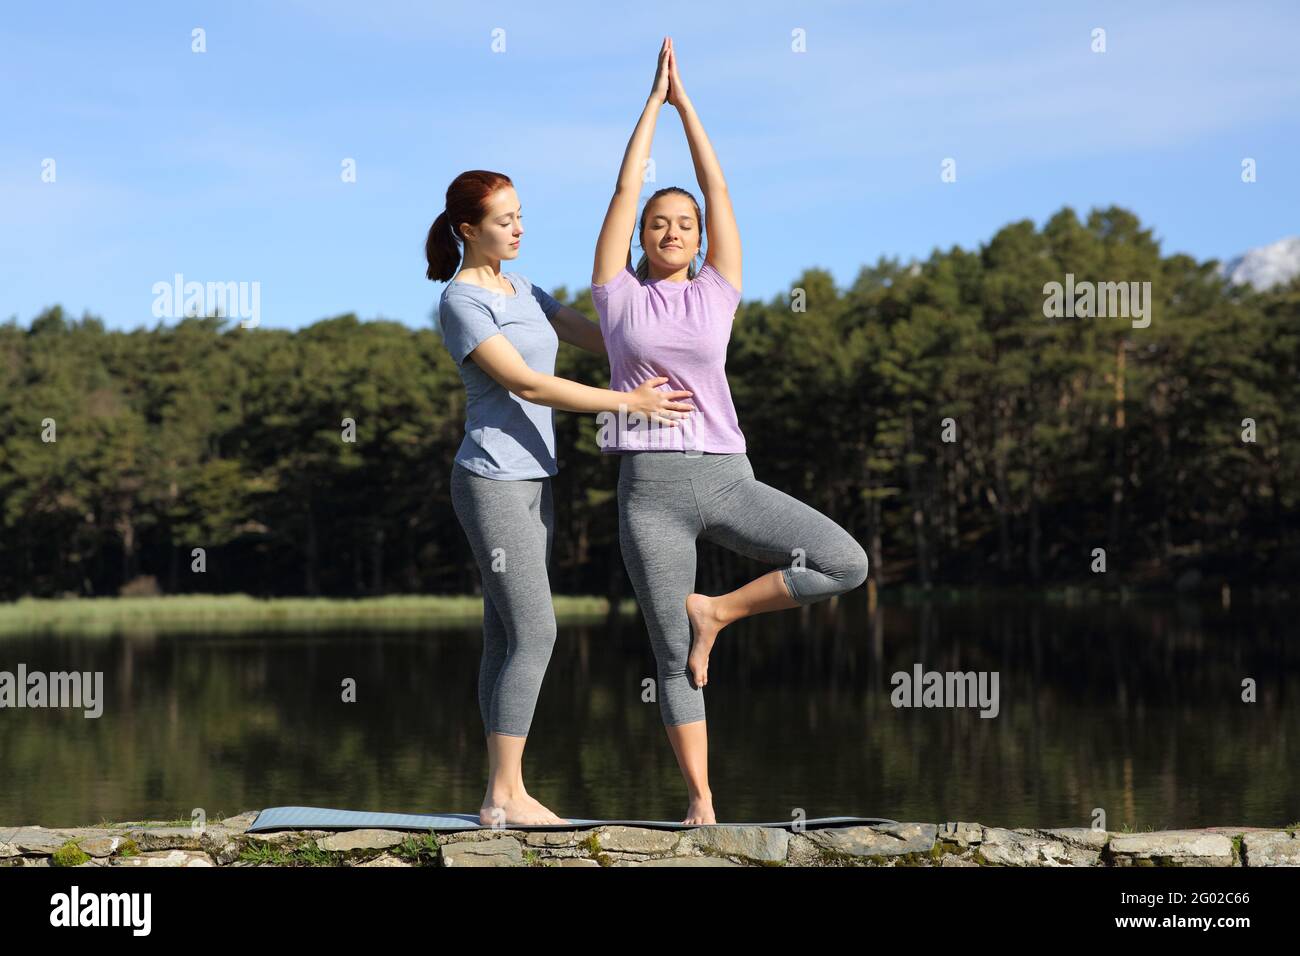 Front view portrait of a yogi teaching yoga to a woman in a lake Stock Photo